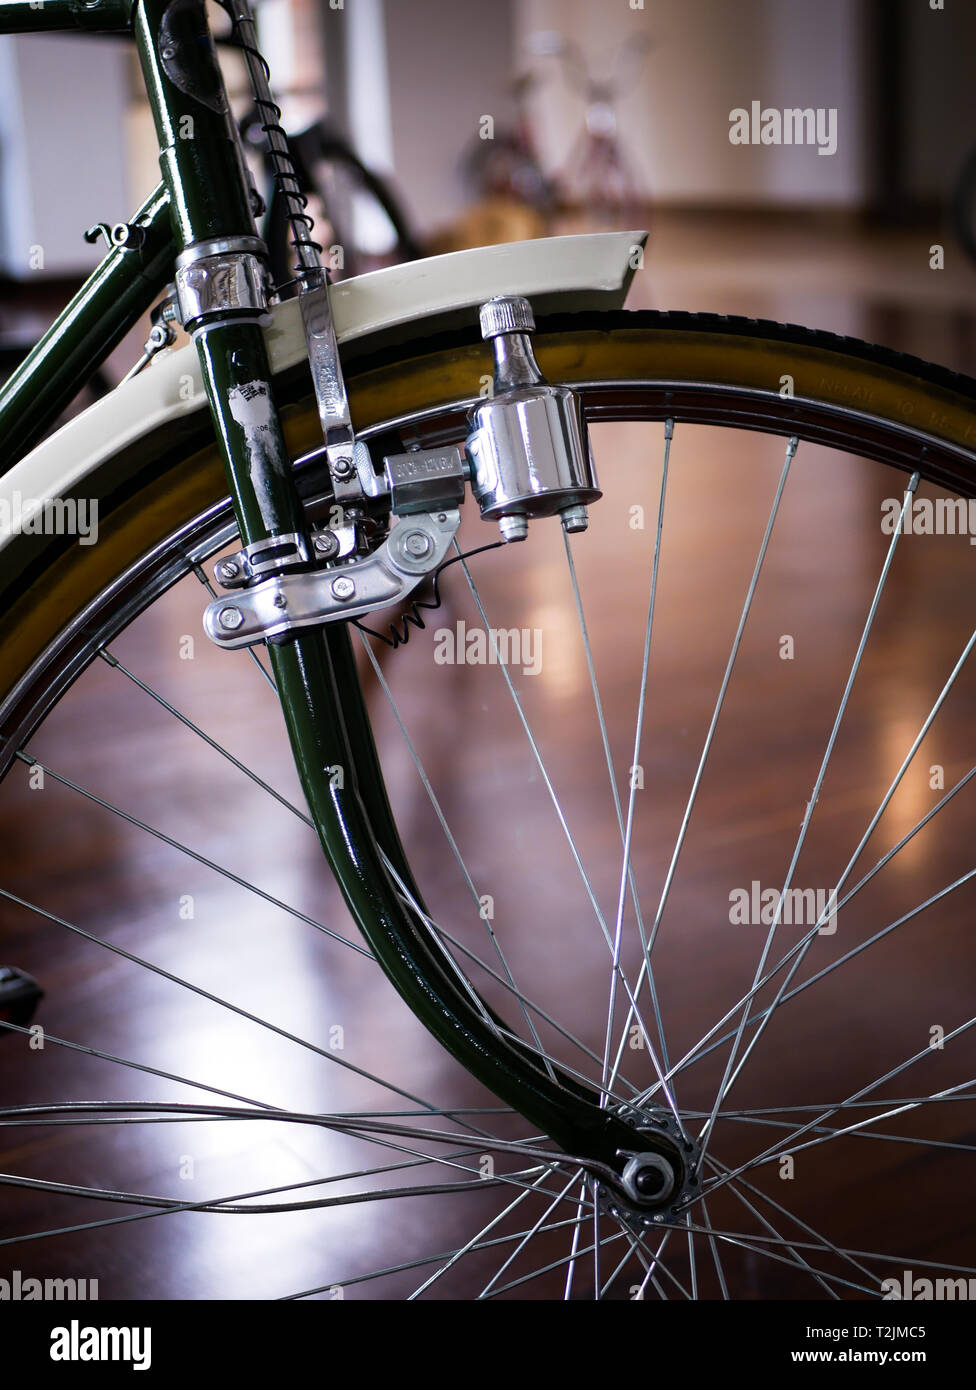 details of a front Wheel of and old bycicle during an expo on the museo el castillo in medellin colombia Stock Photo